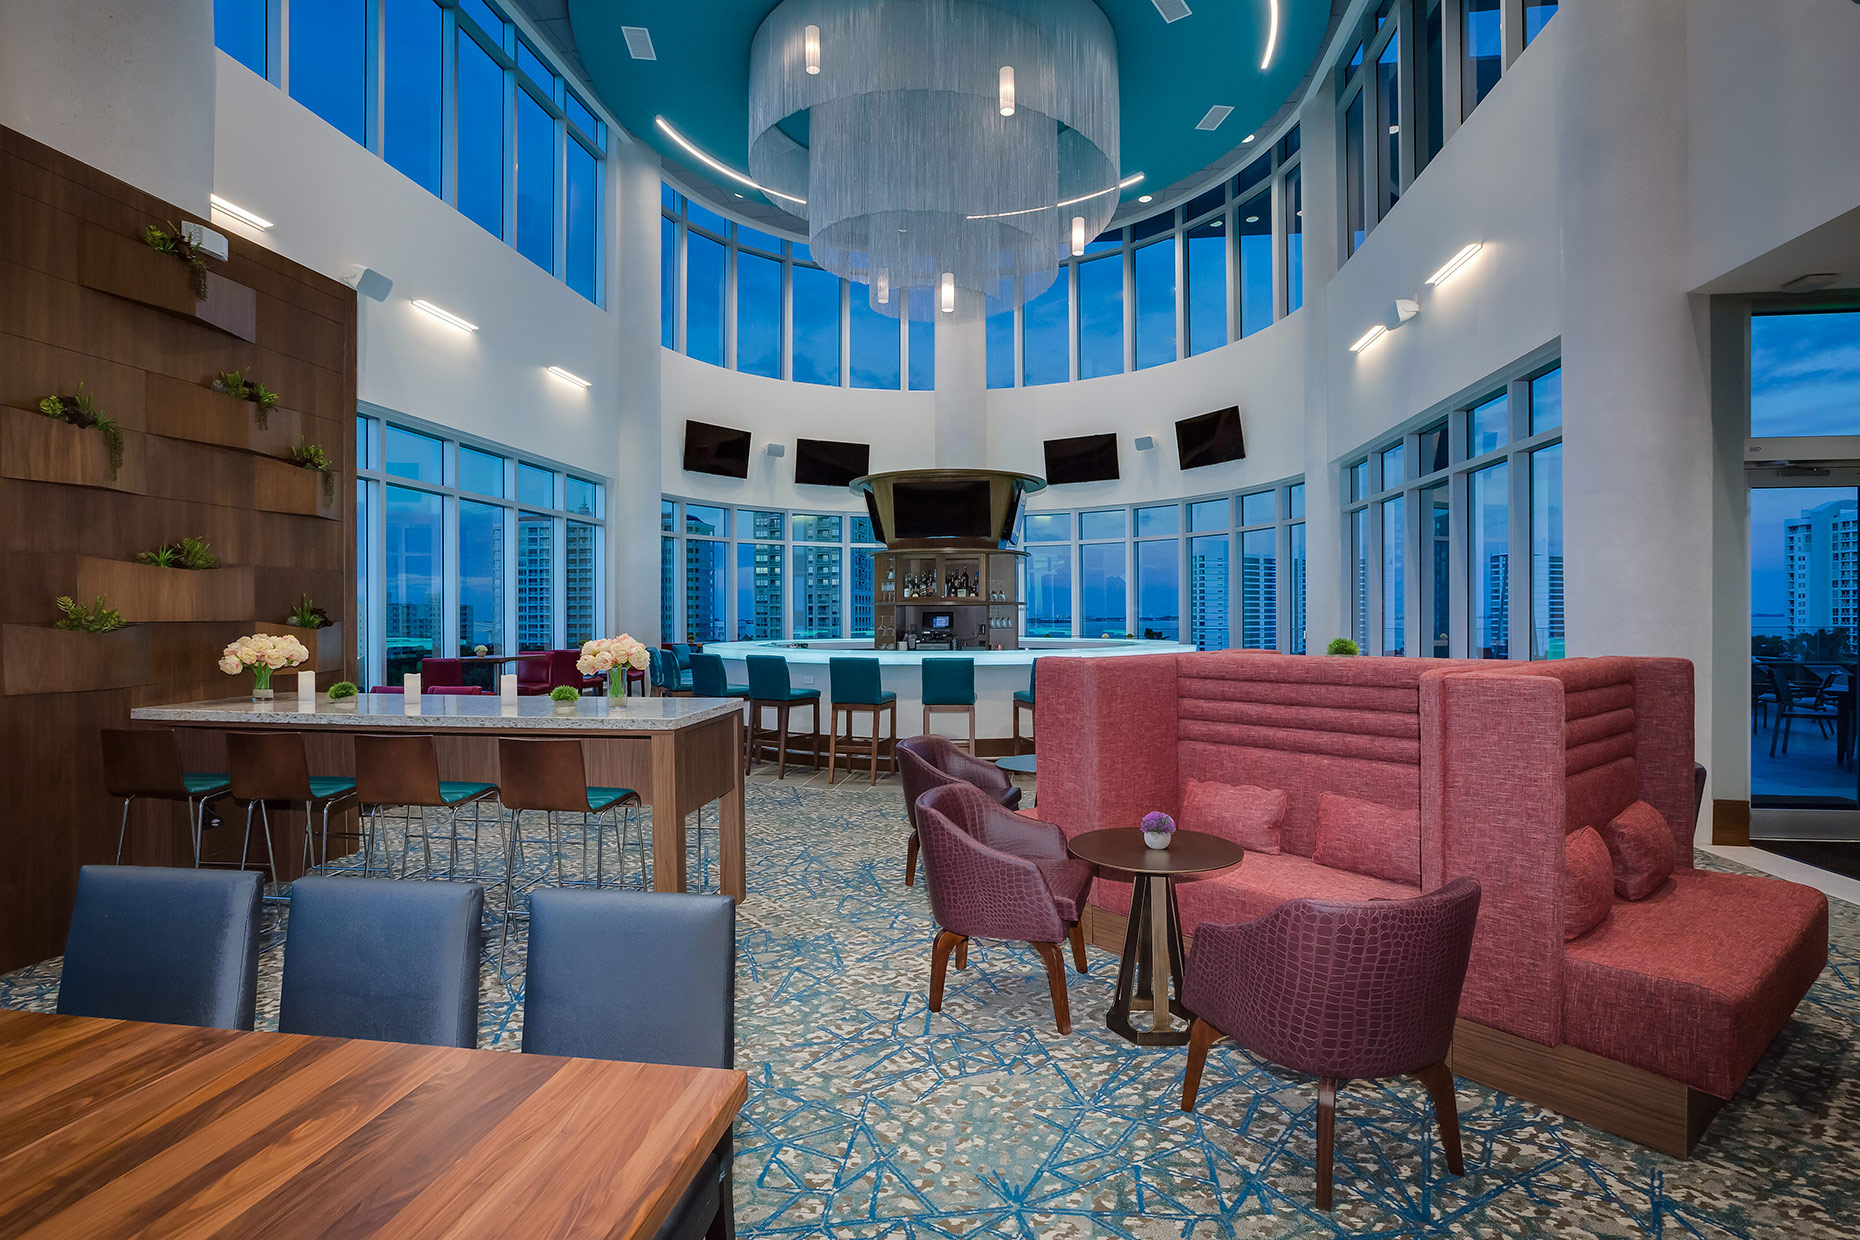 Architecture and Interiors Photographer Austin, Texas - Dawn view from the spacious Bridges restaurant at the Embassy Suites Hilton in Sarasota, FL